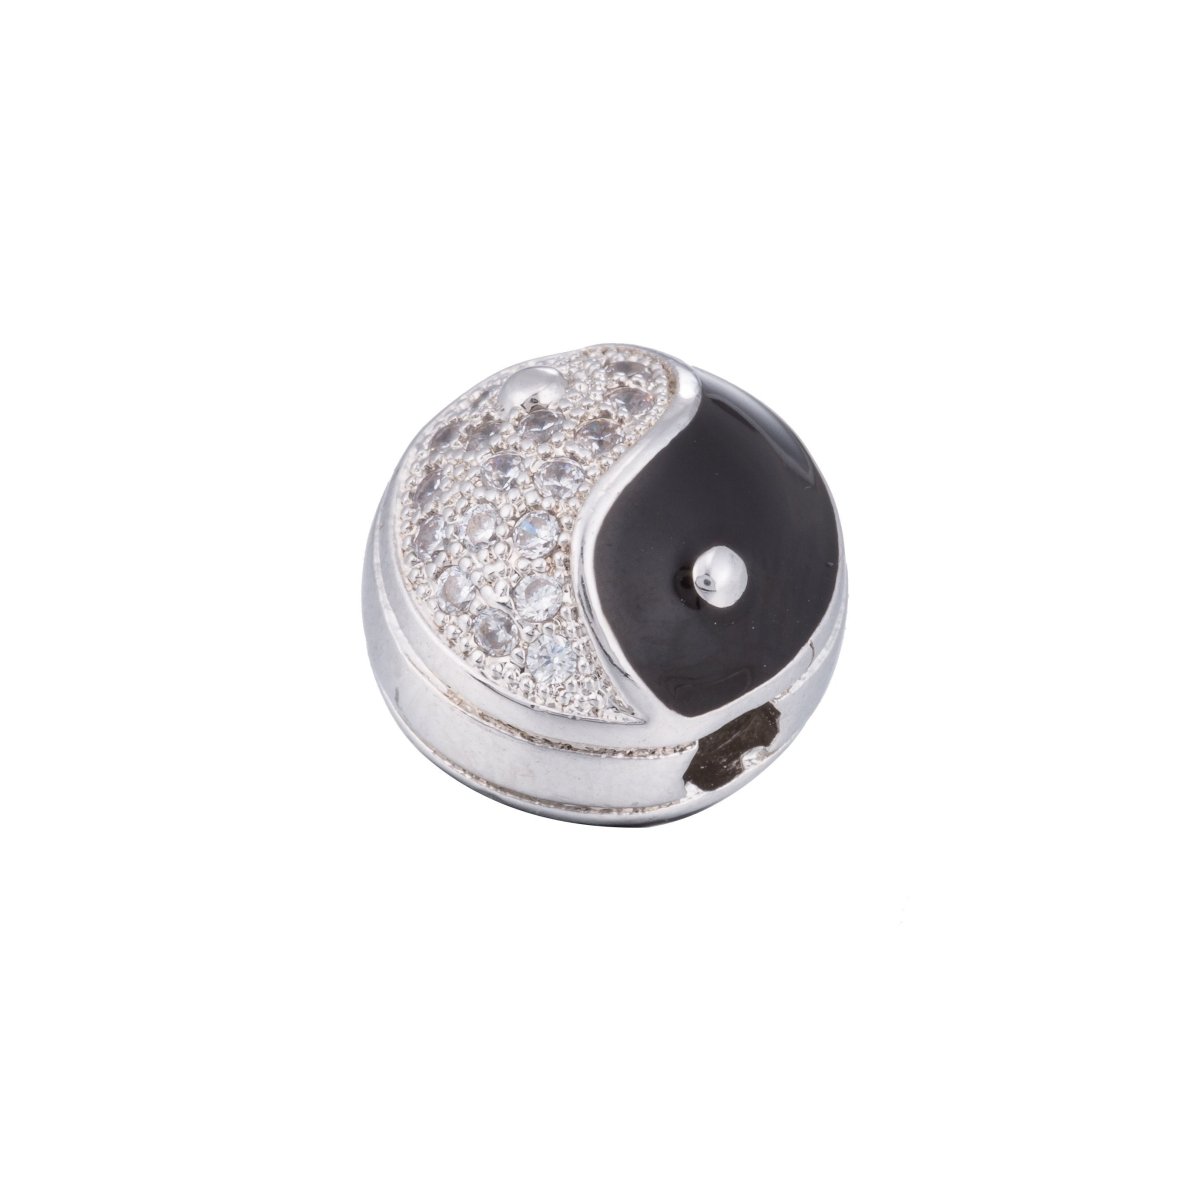 White Gold Filled Yin Yang Buddhism Balance Spacer Silver Bead | B-071 - DLUXCA